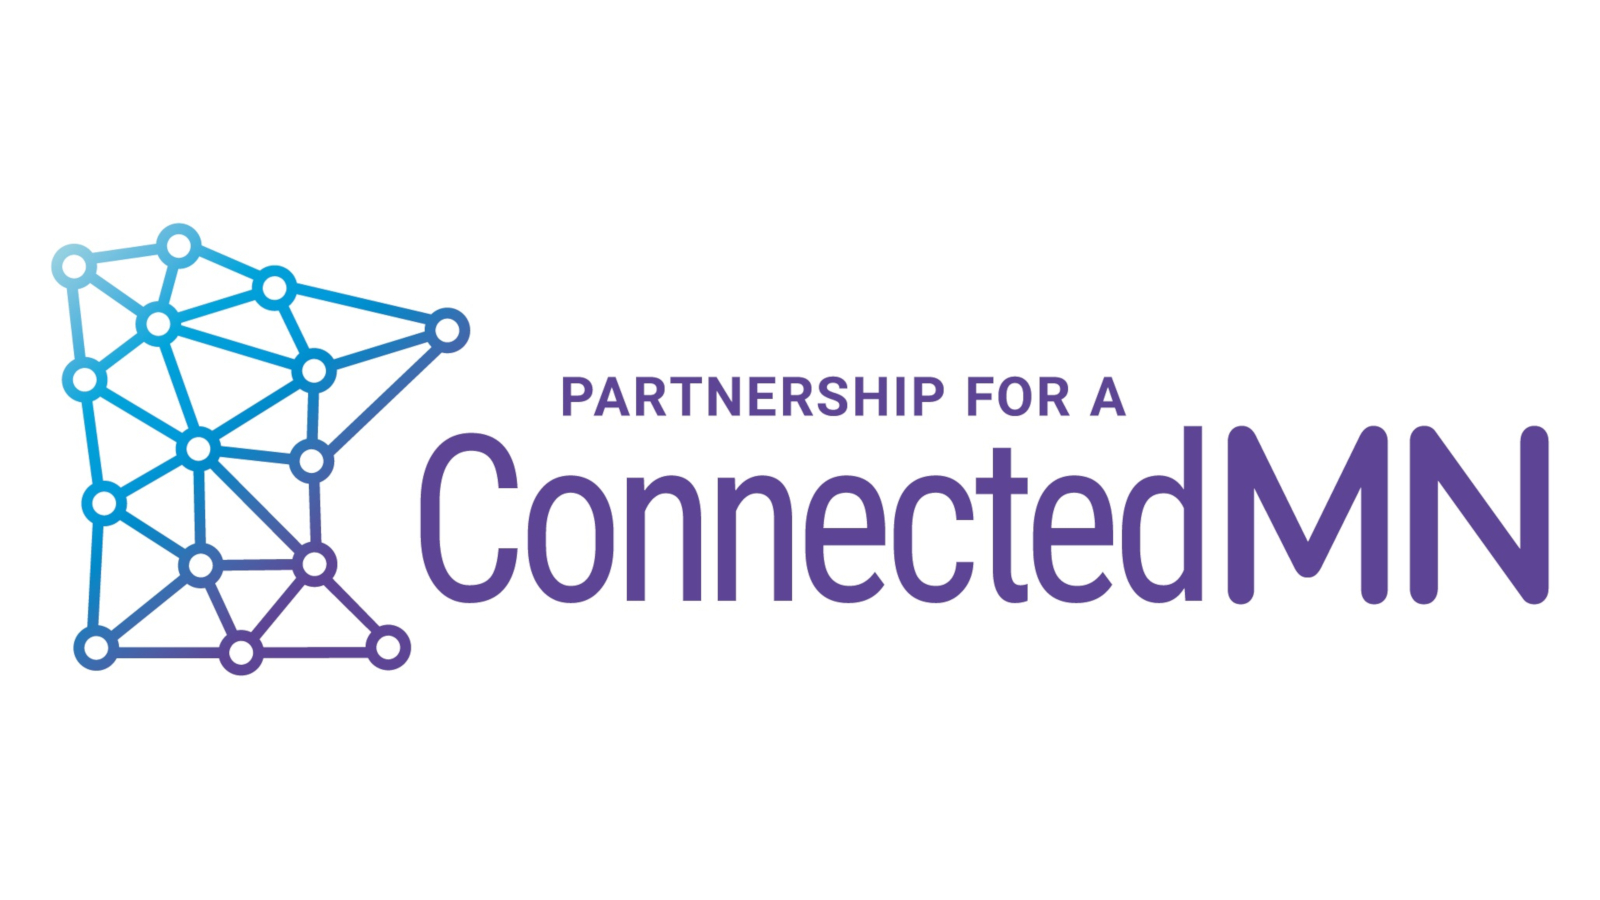 The Connected MN logo